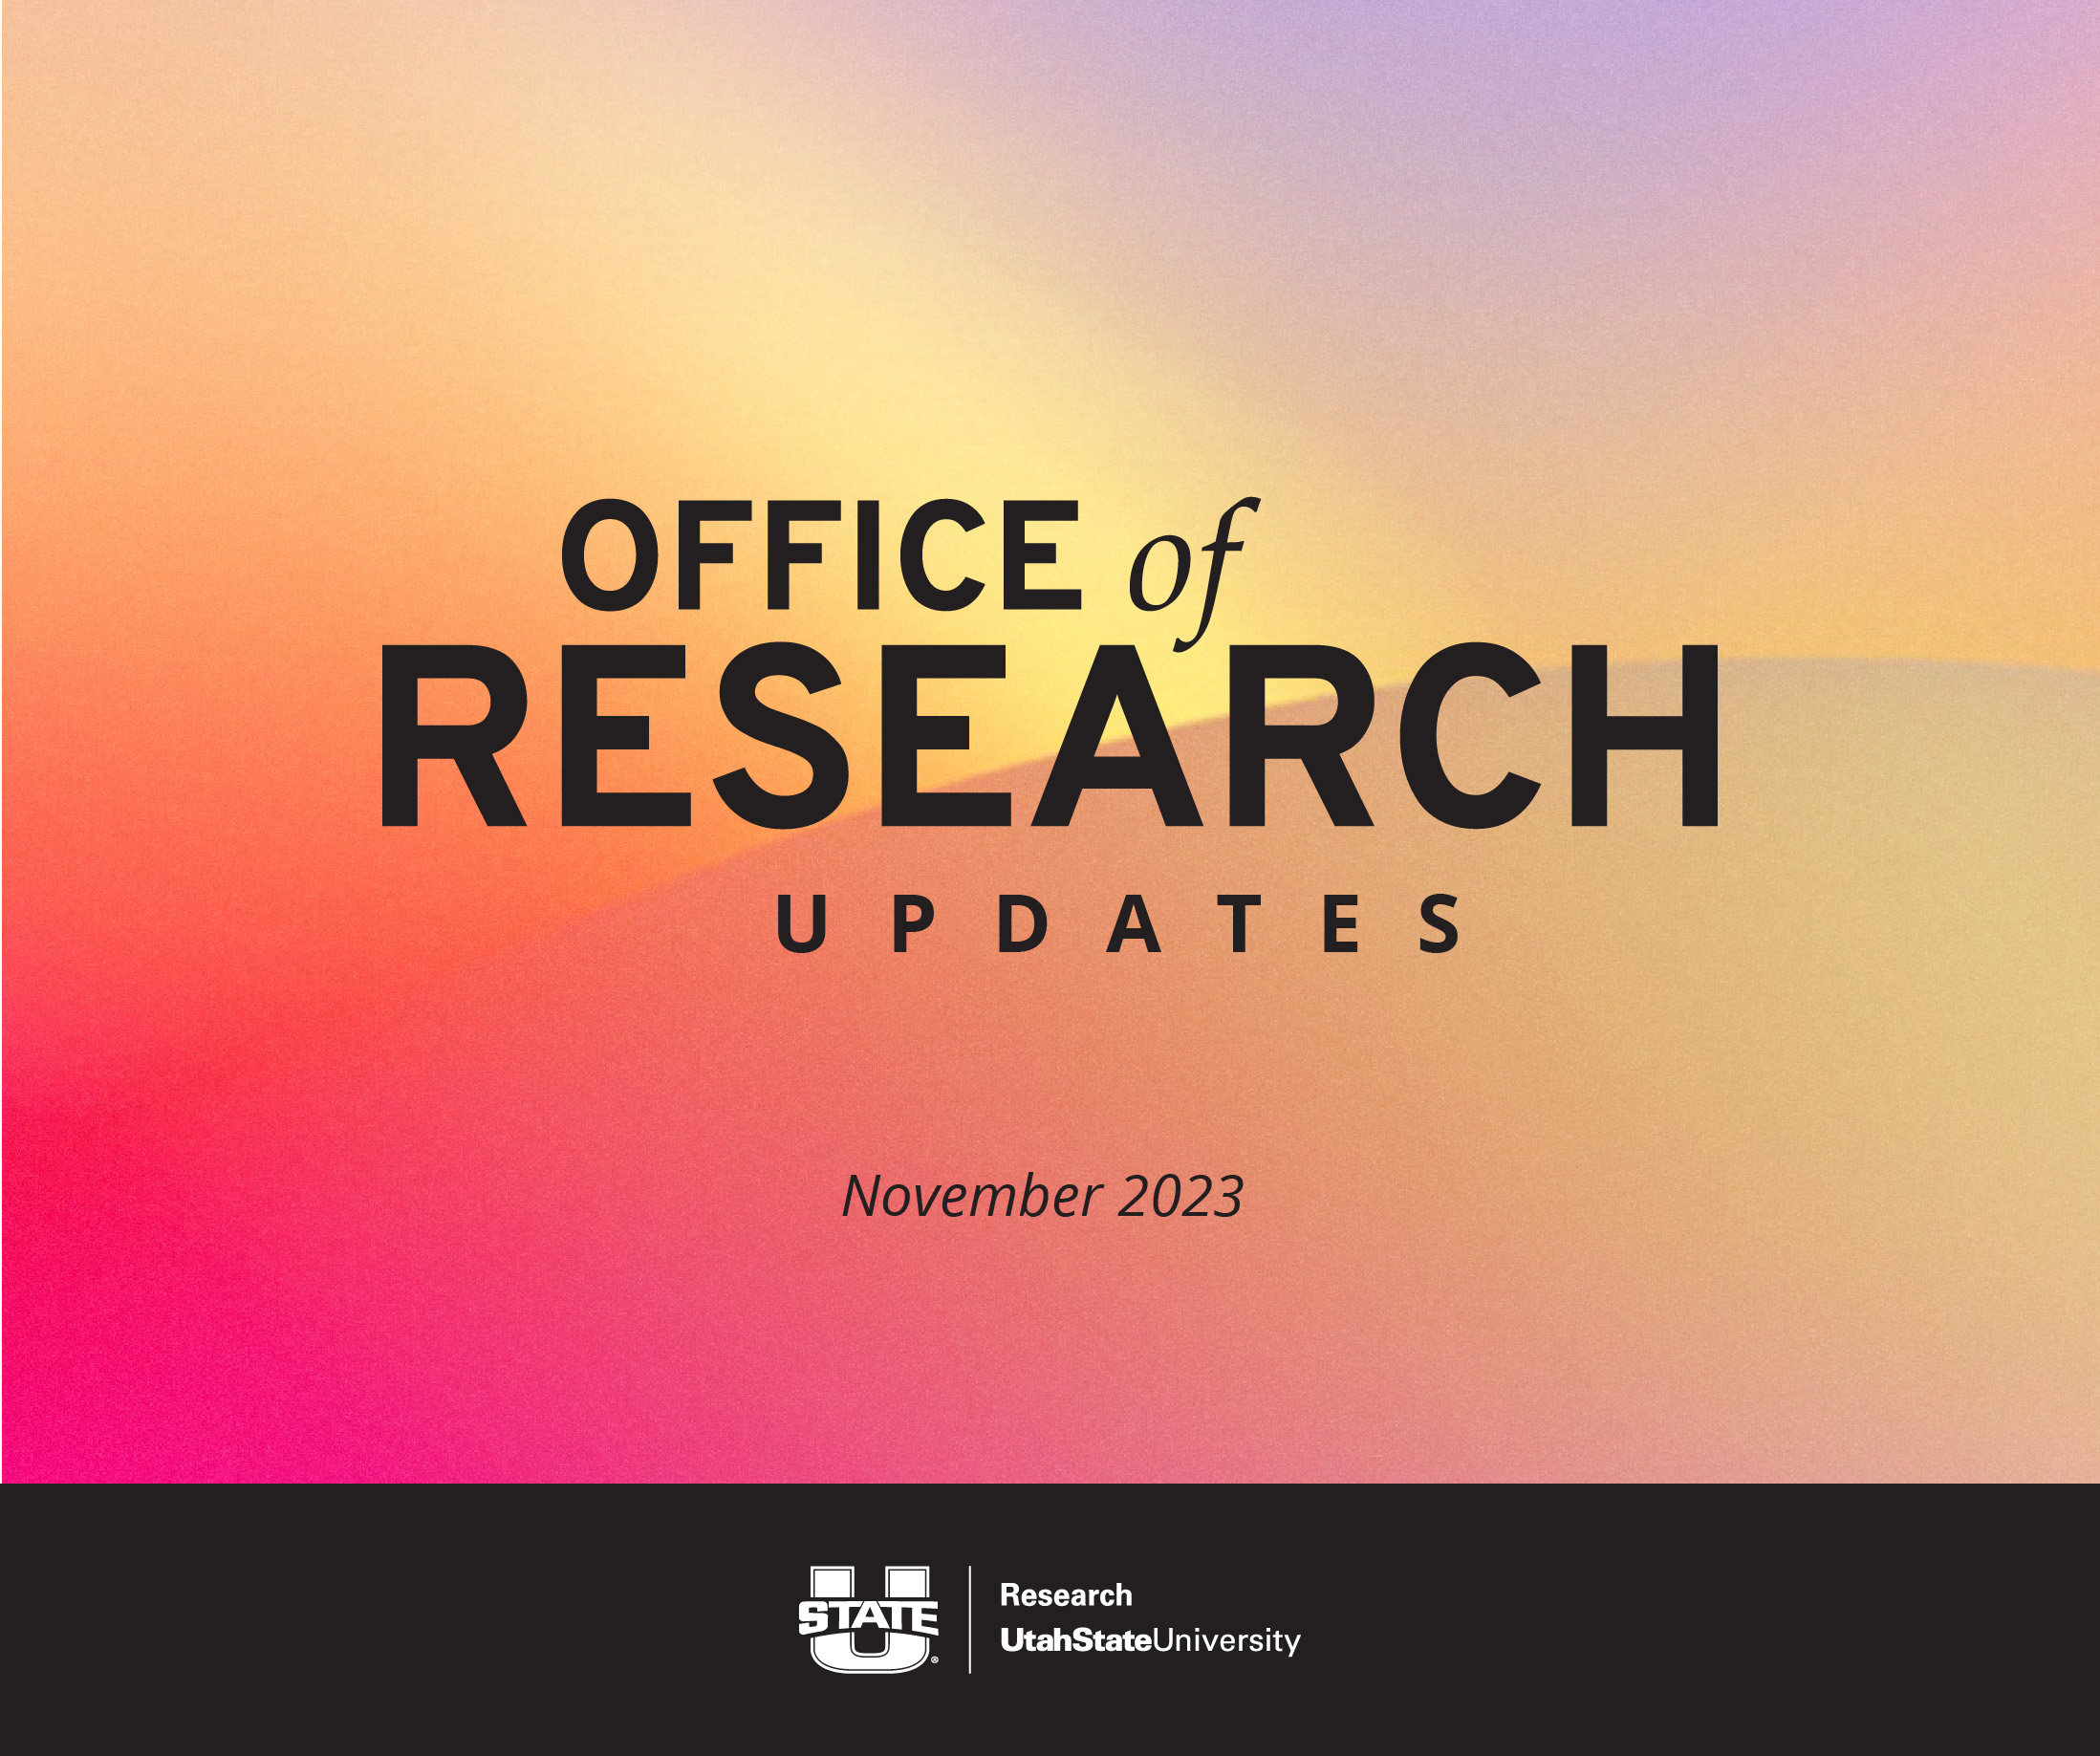 Office of Research Updates November 2023